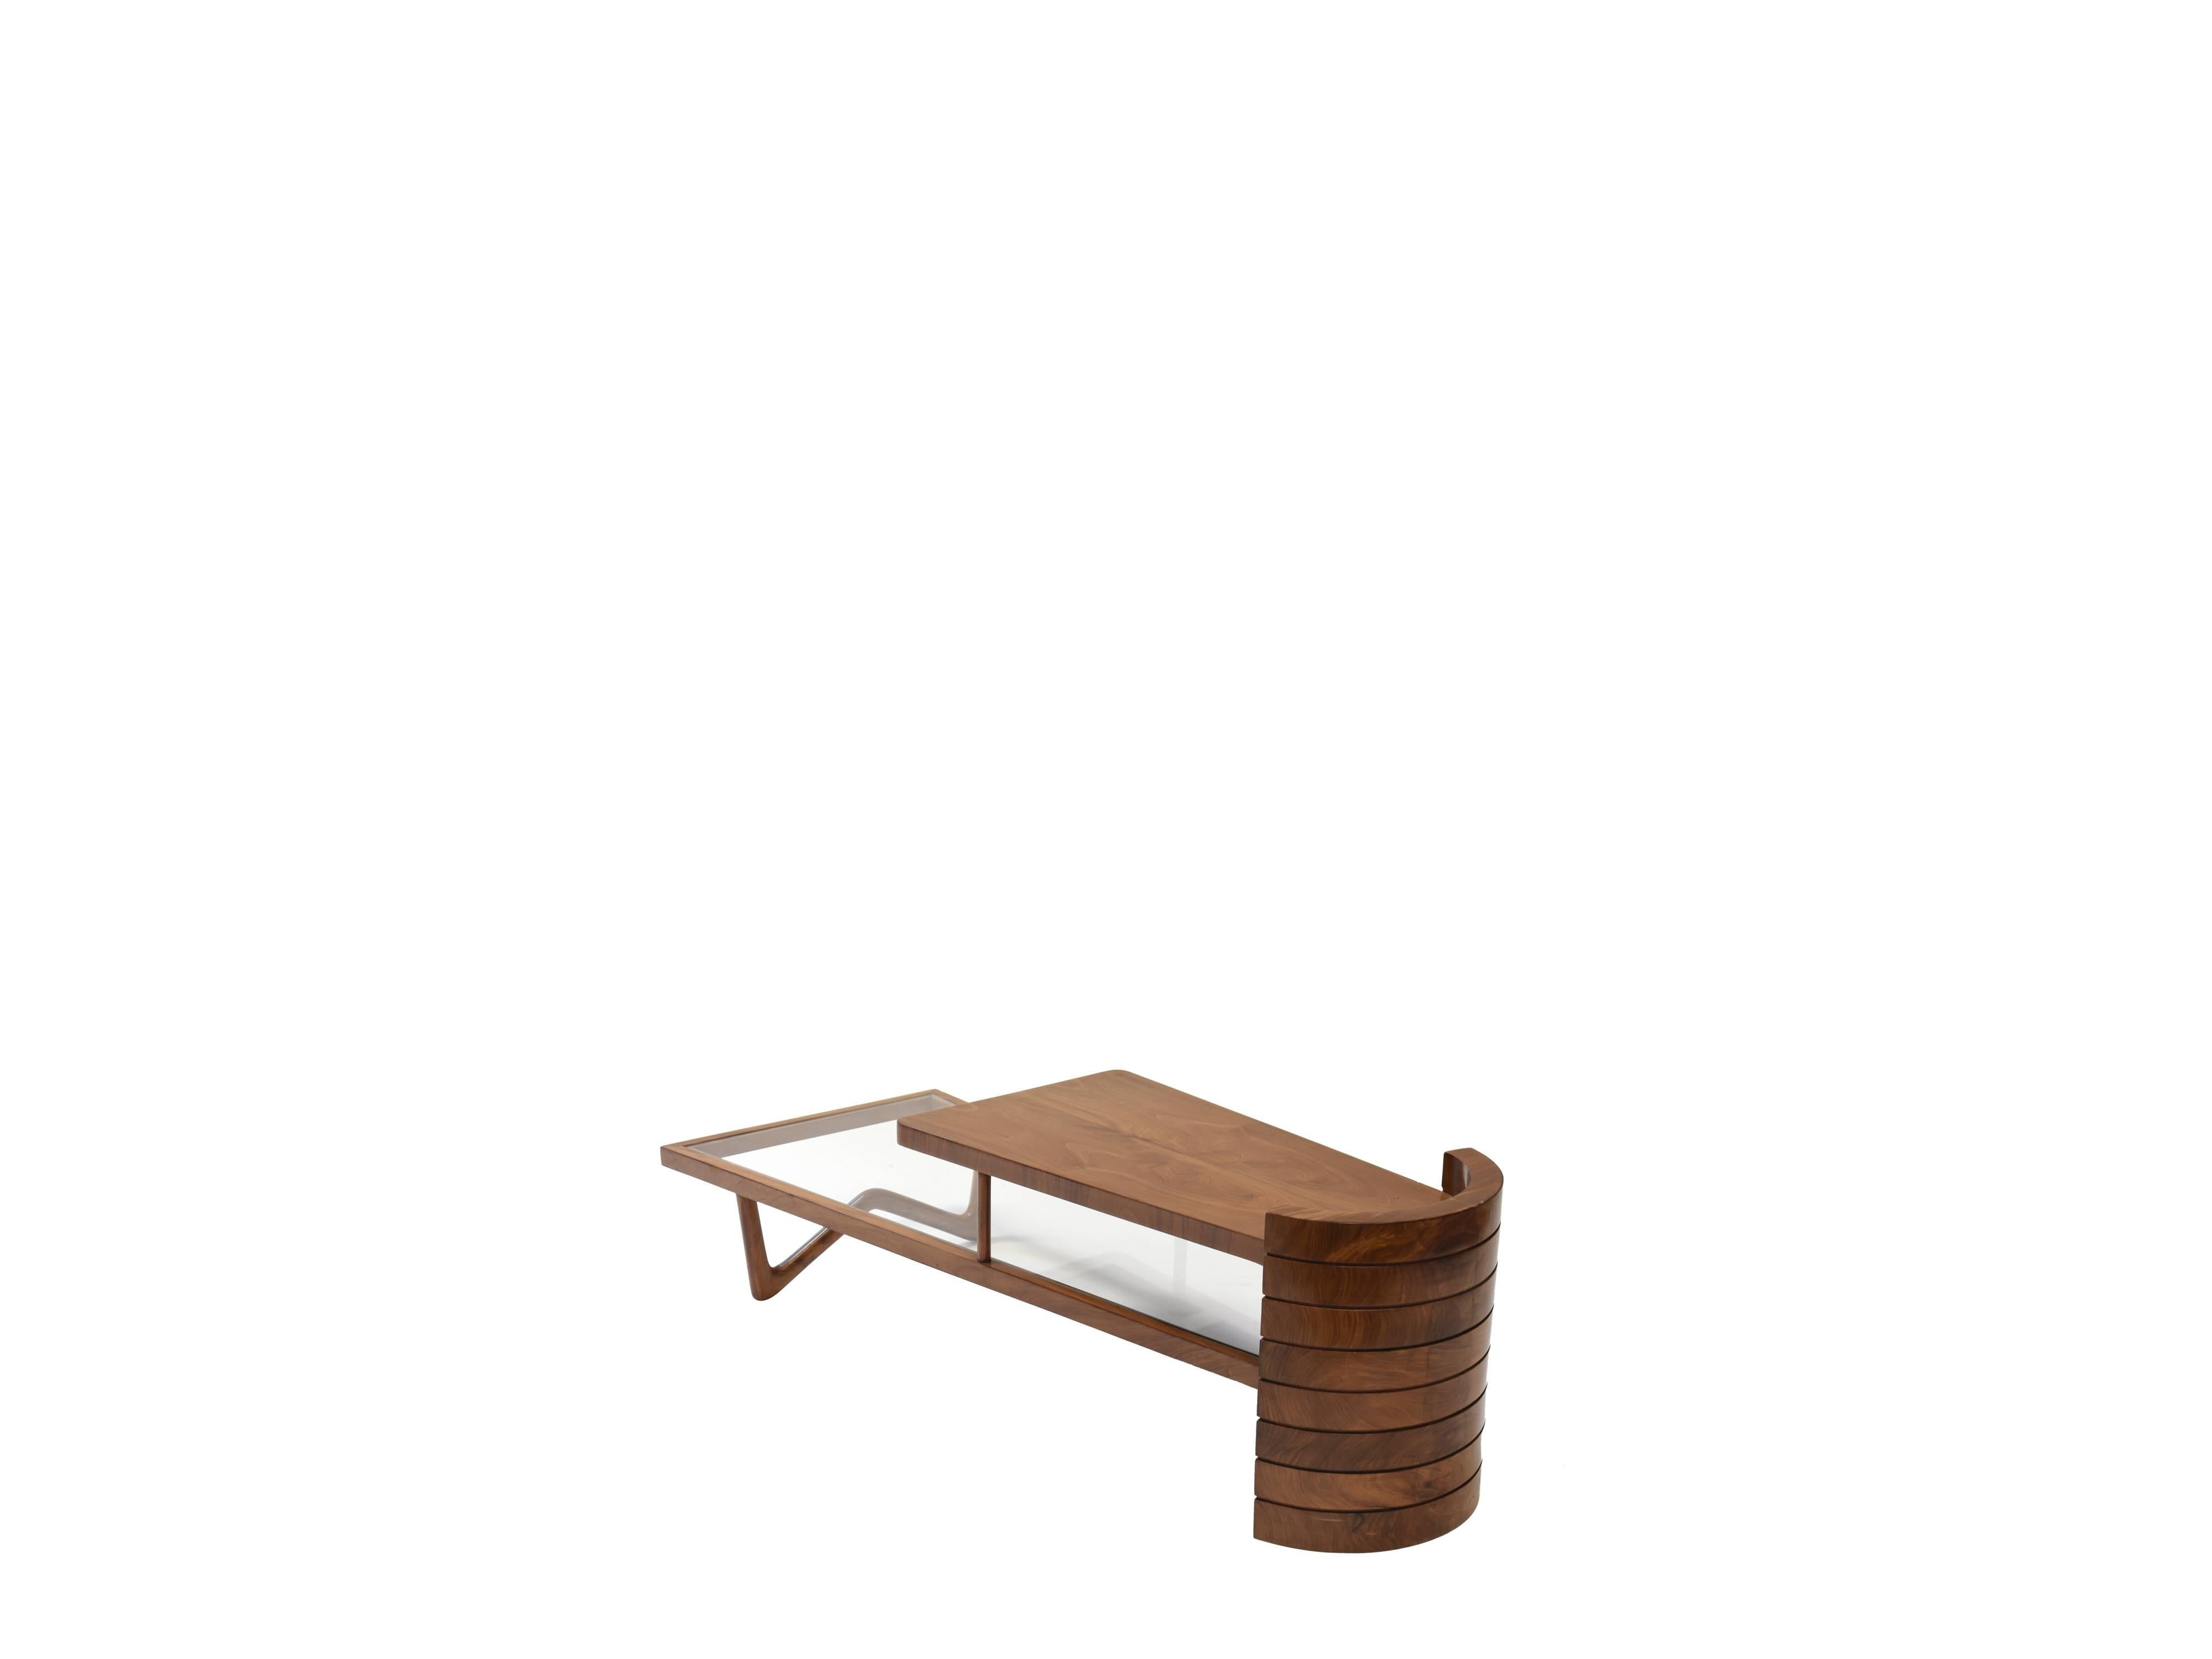 Center table built in Brazilian caviúna wood by Giuseppe Scapinelli.

This striking centre table has two levels, where you can decorate your decoration. On one side, a base built with hand-sculpted curves and on the other a solid wood base.